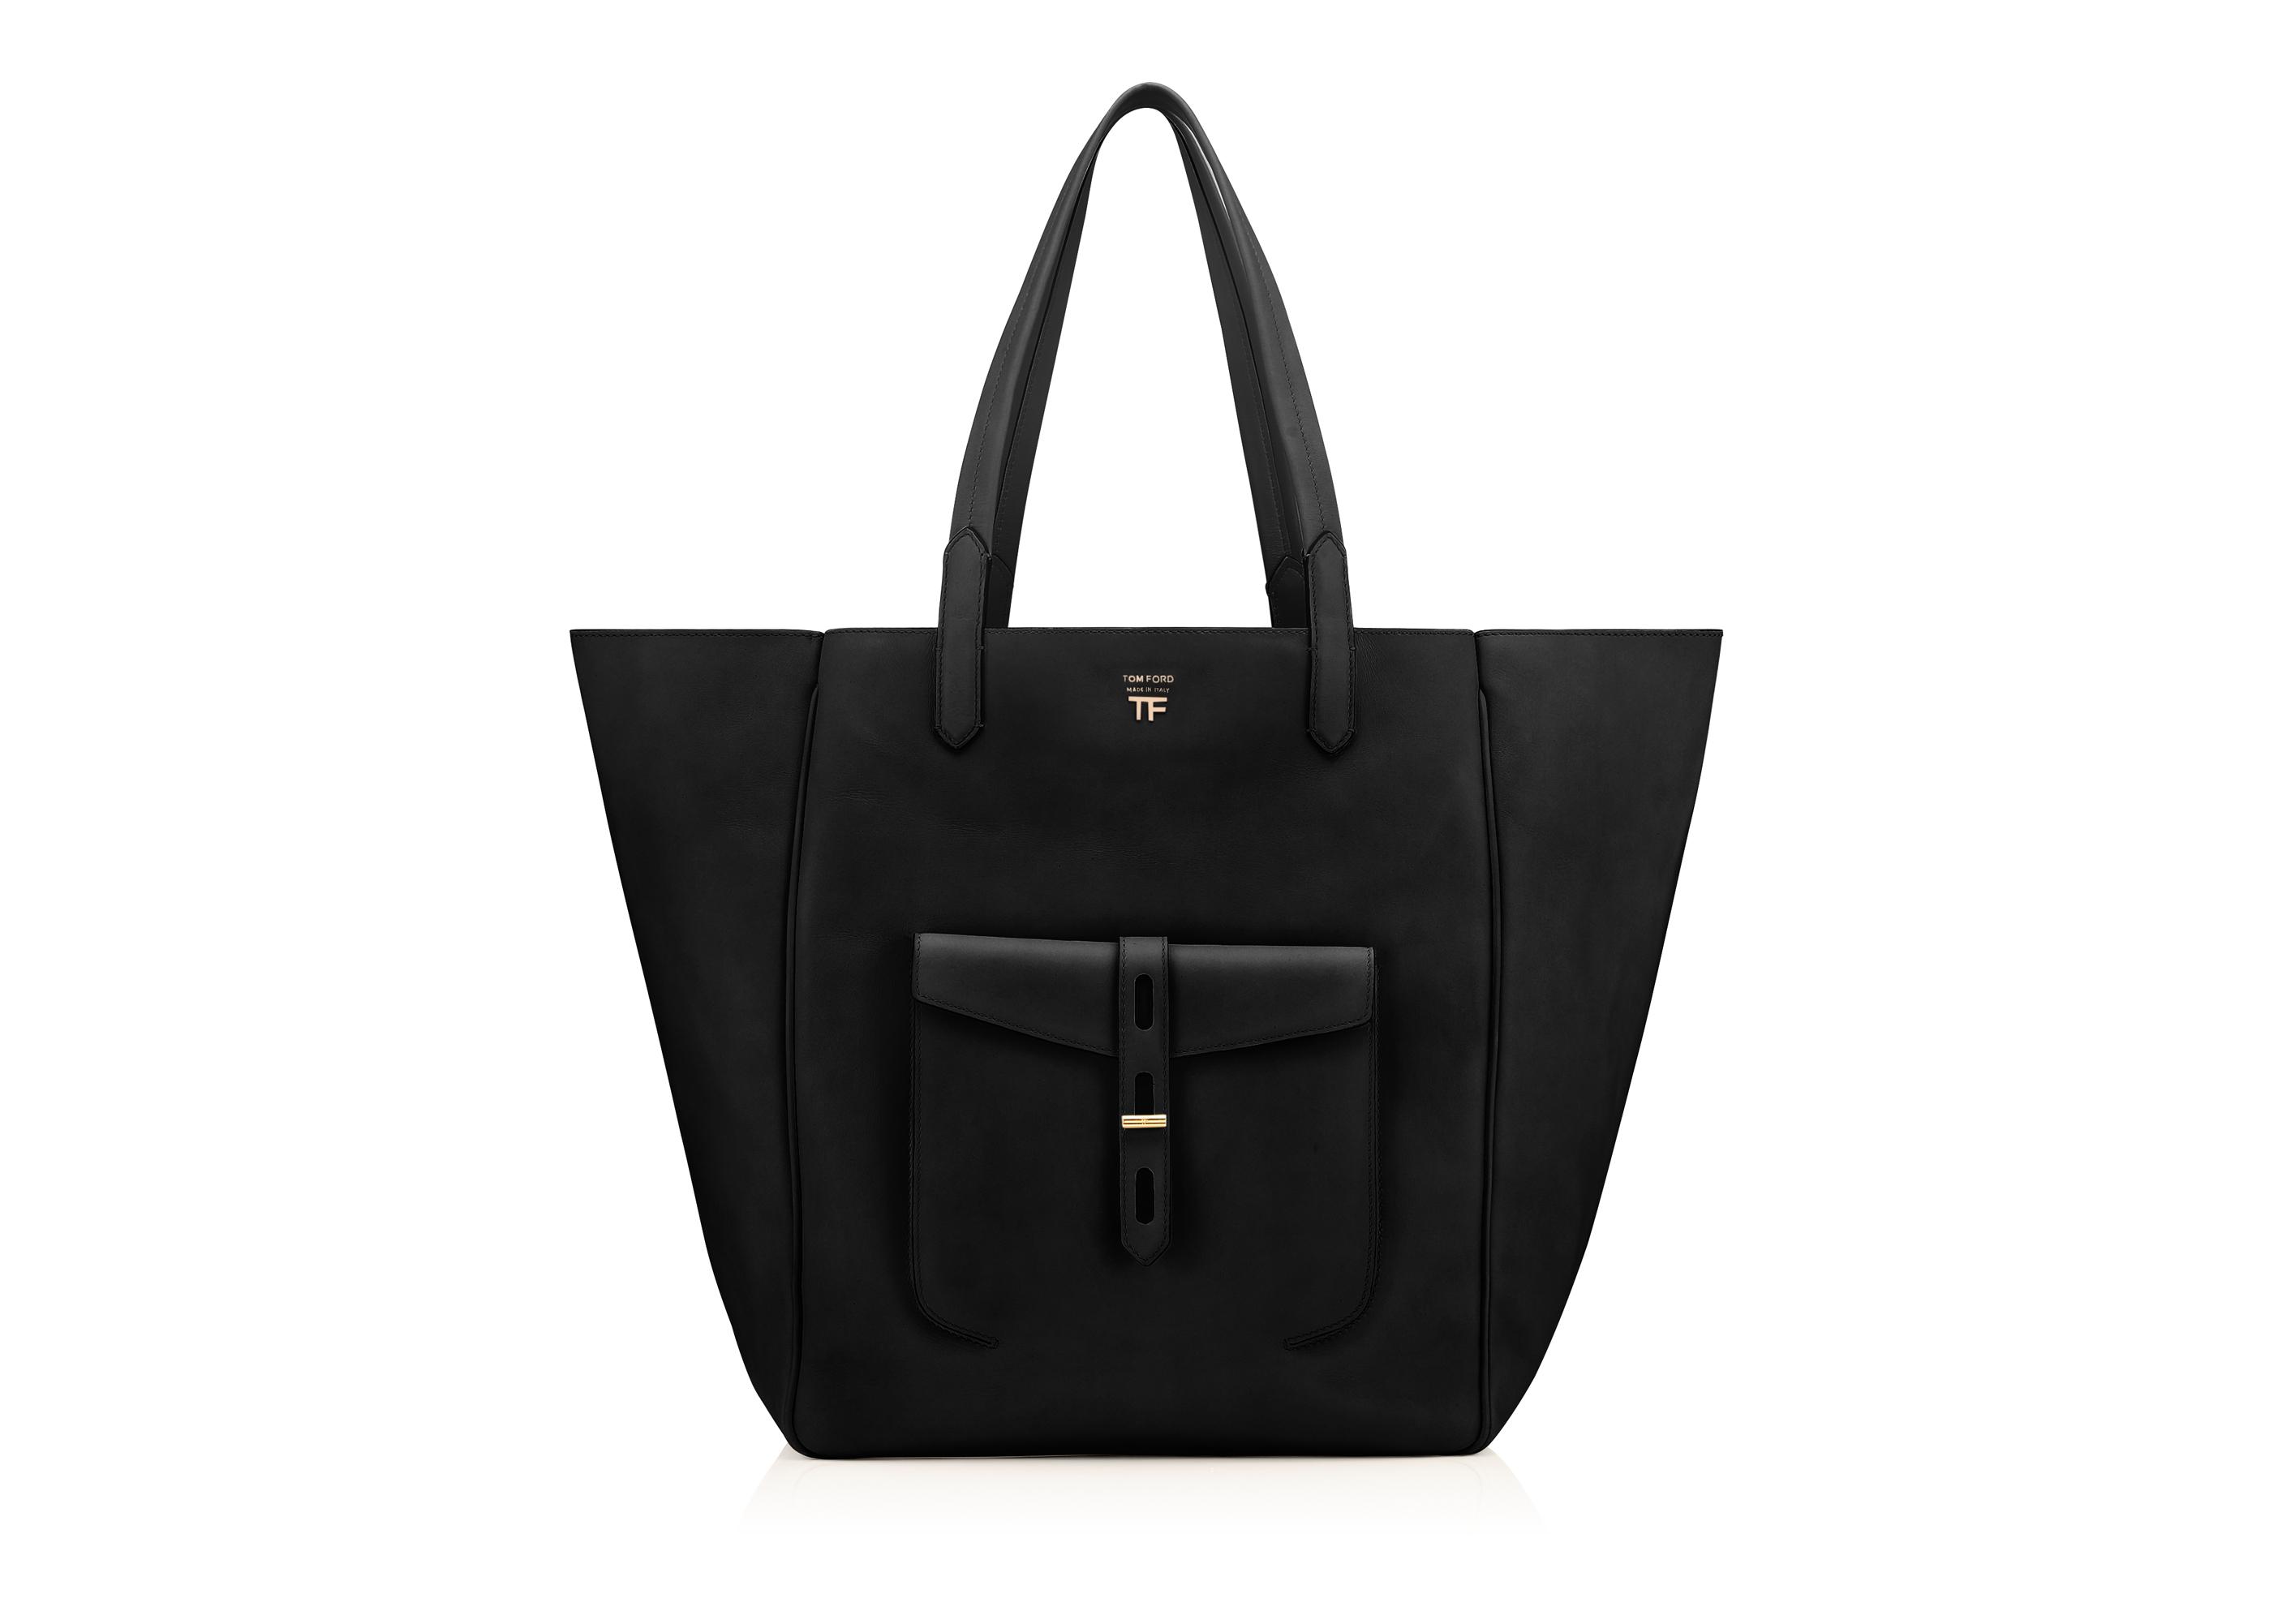 Twist leather tote